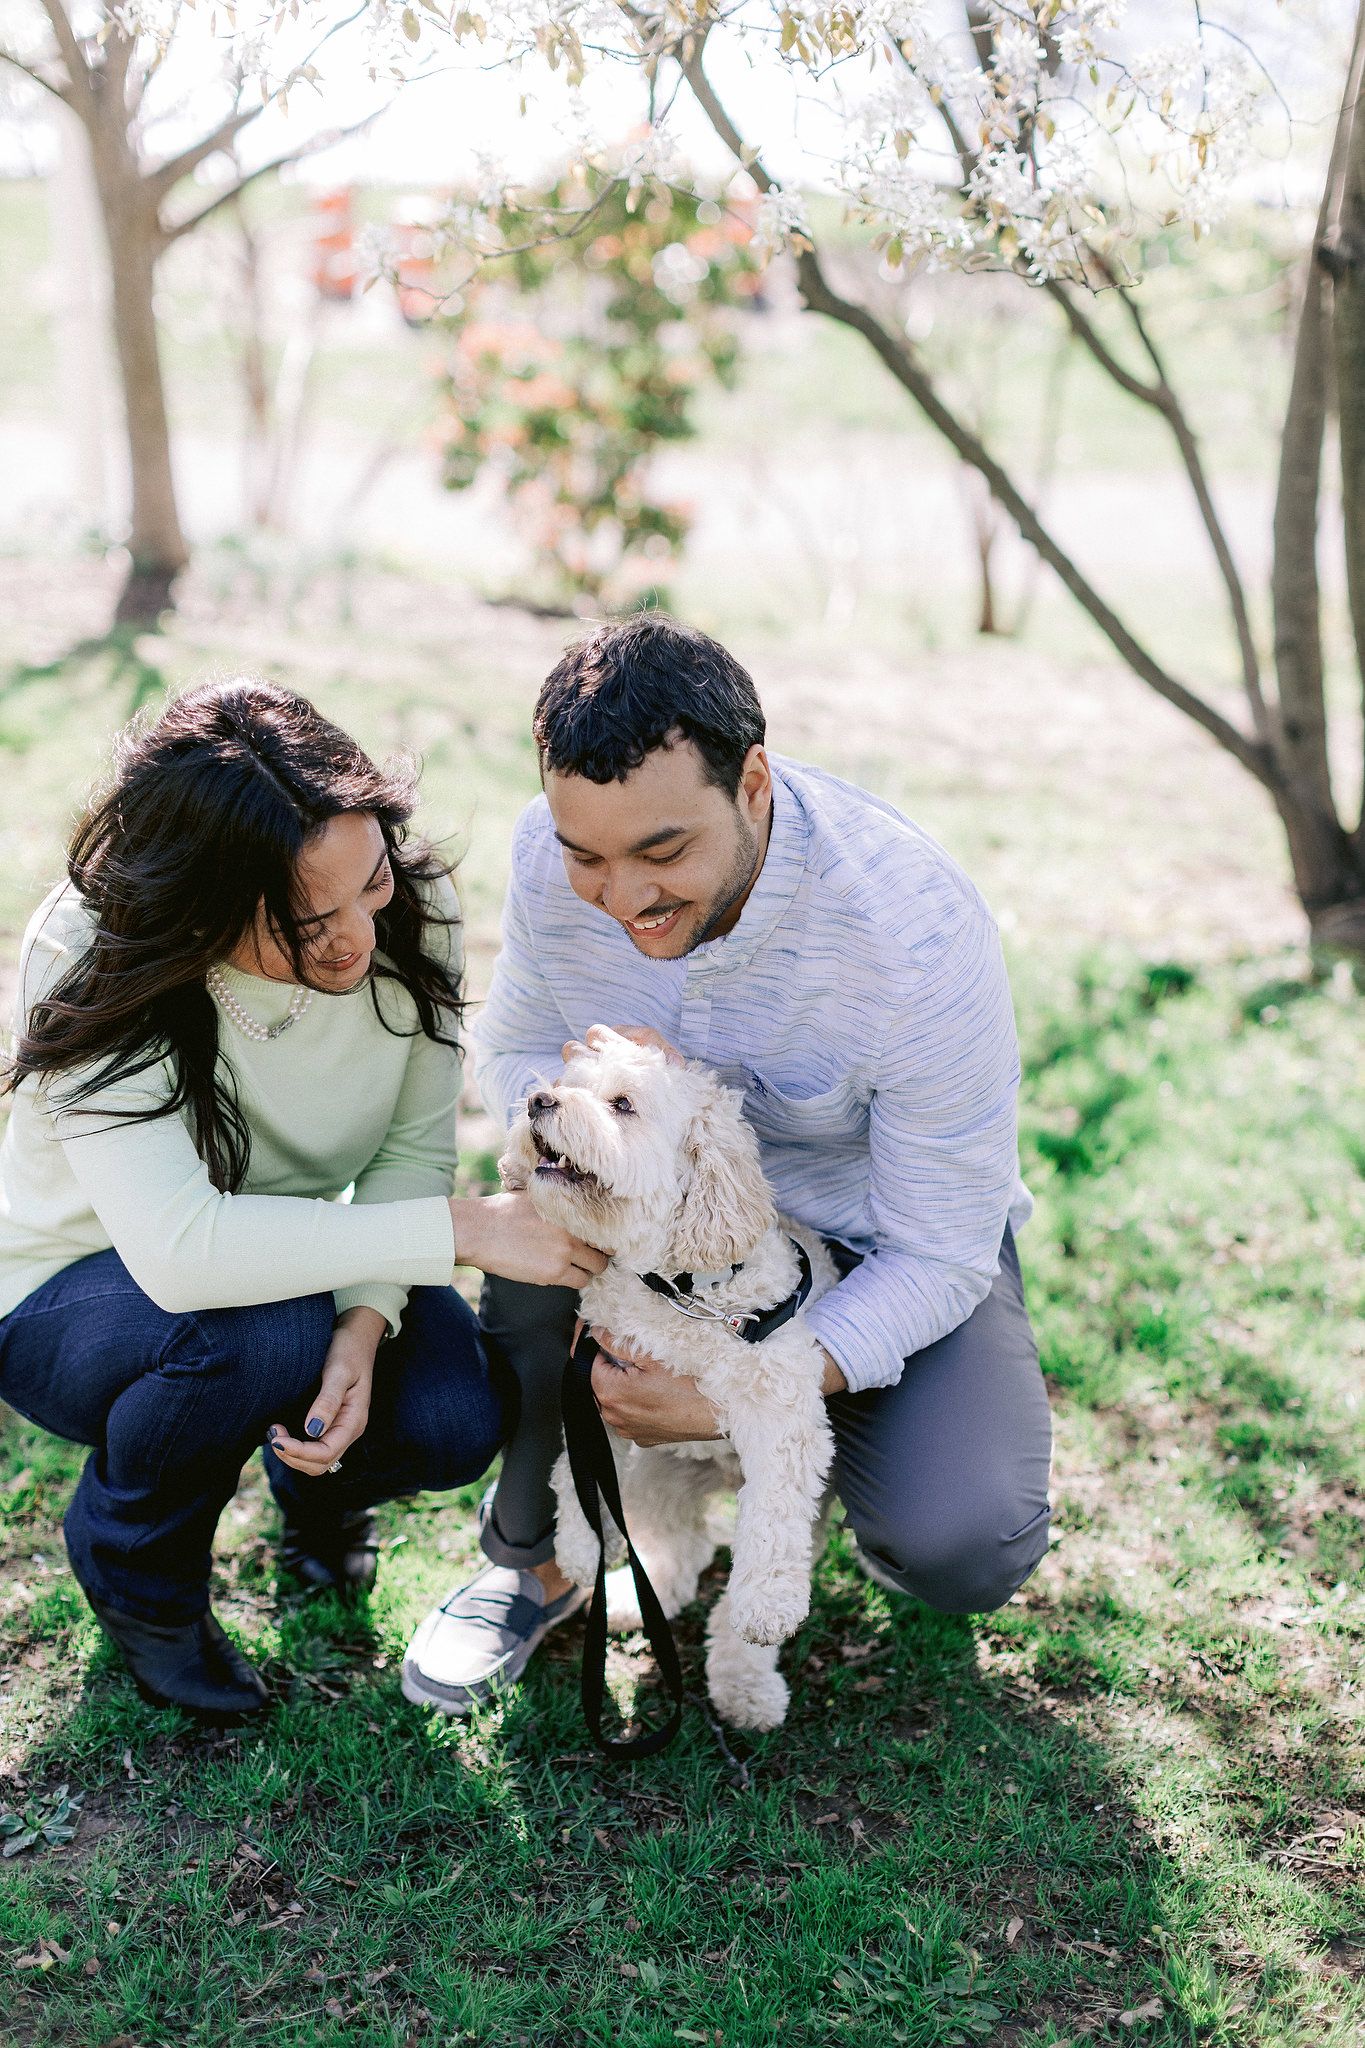 The couple are happily patting their dog in a garden. NYC spring engagement Image by Jenny Fu Studio